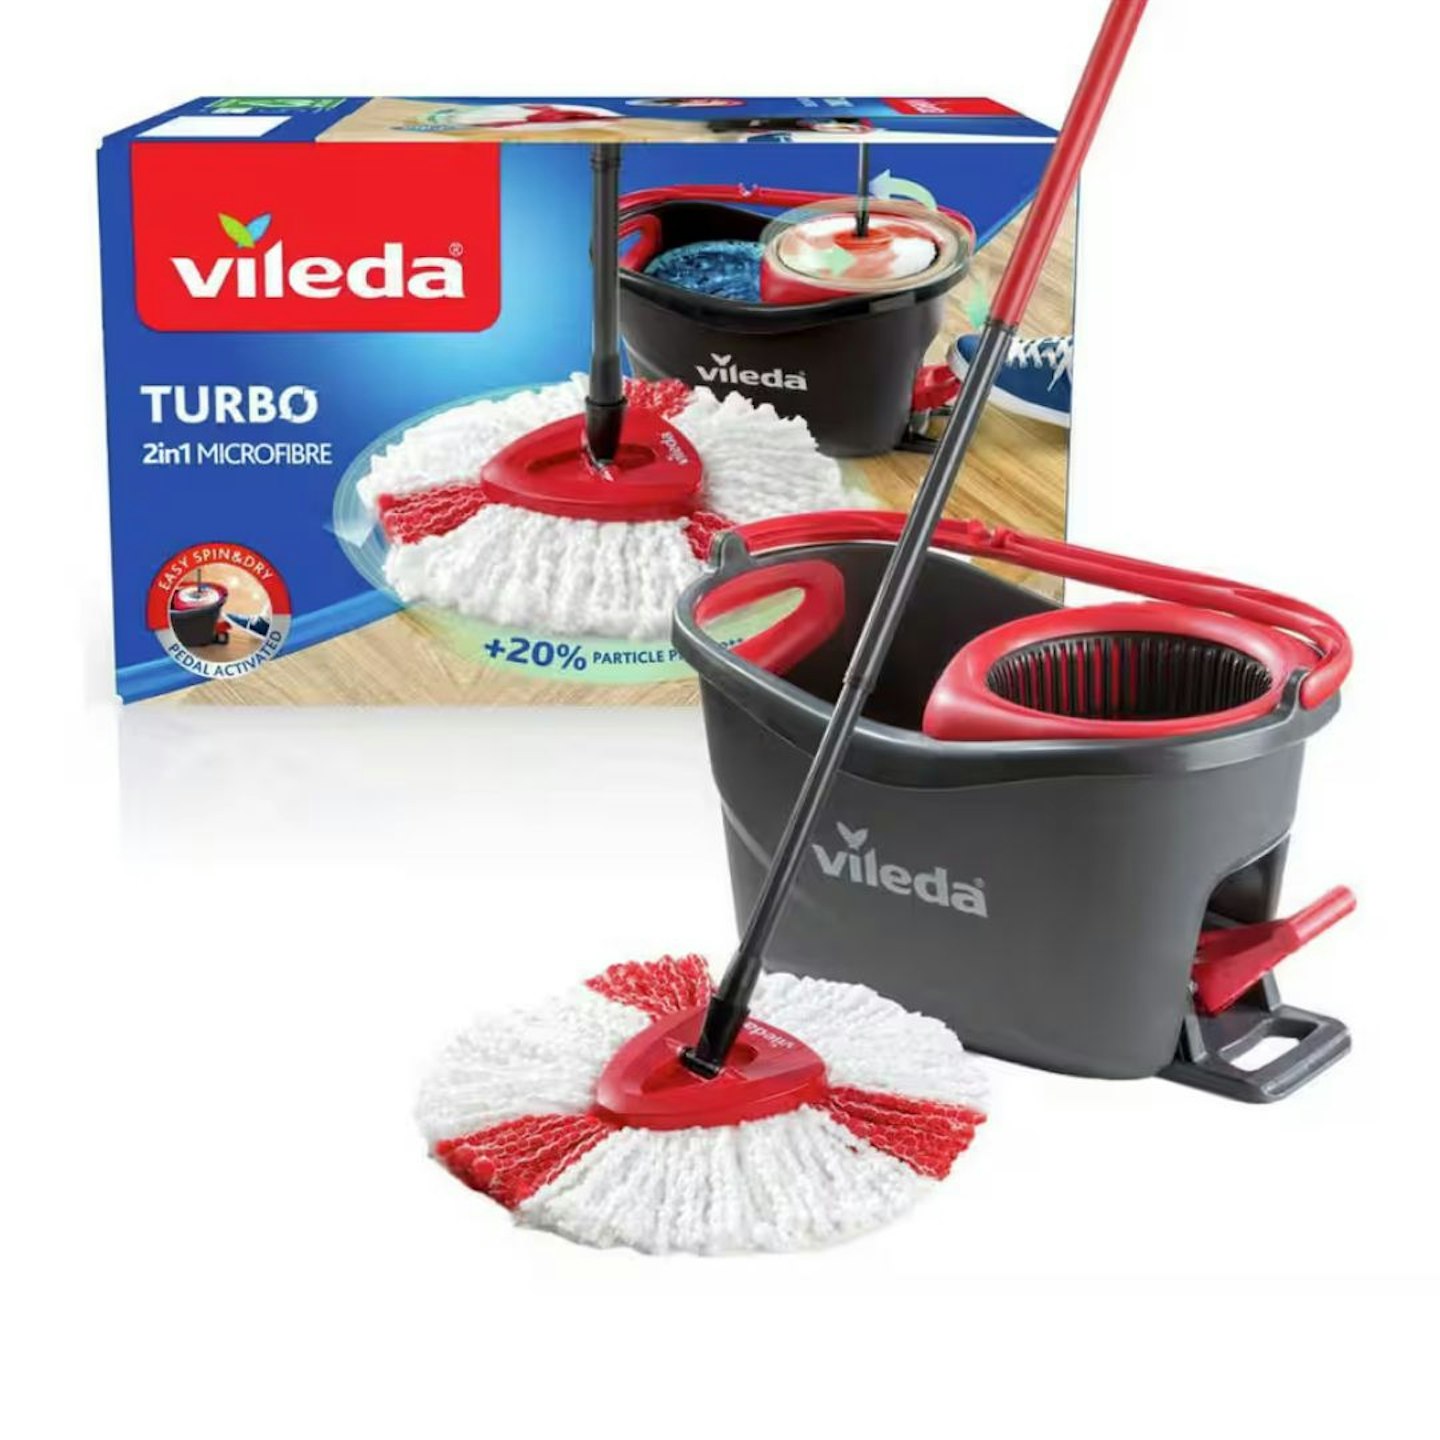 The best Argos deals: Vileda Easy Wring and Clean Turbo Spin Mop and Bucket Set